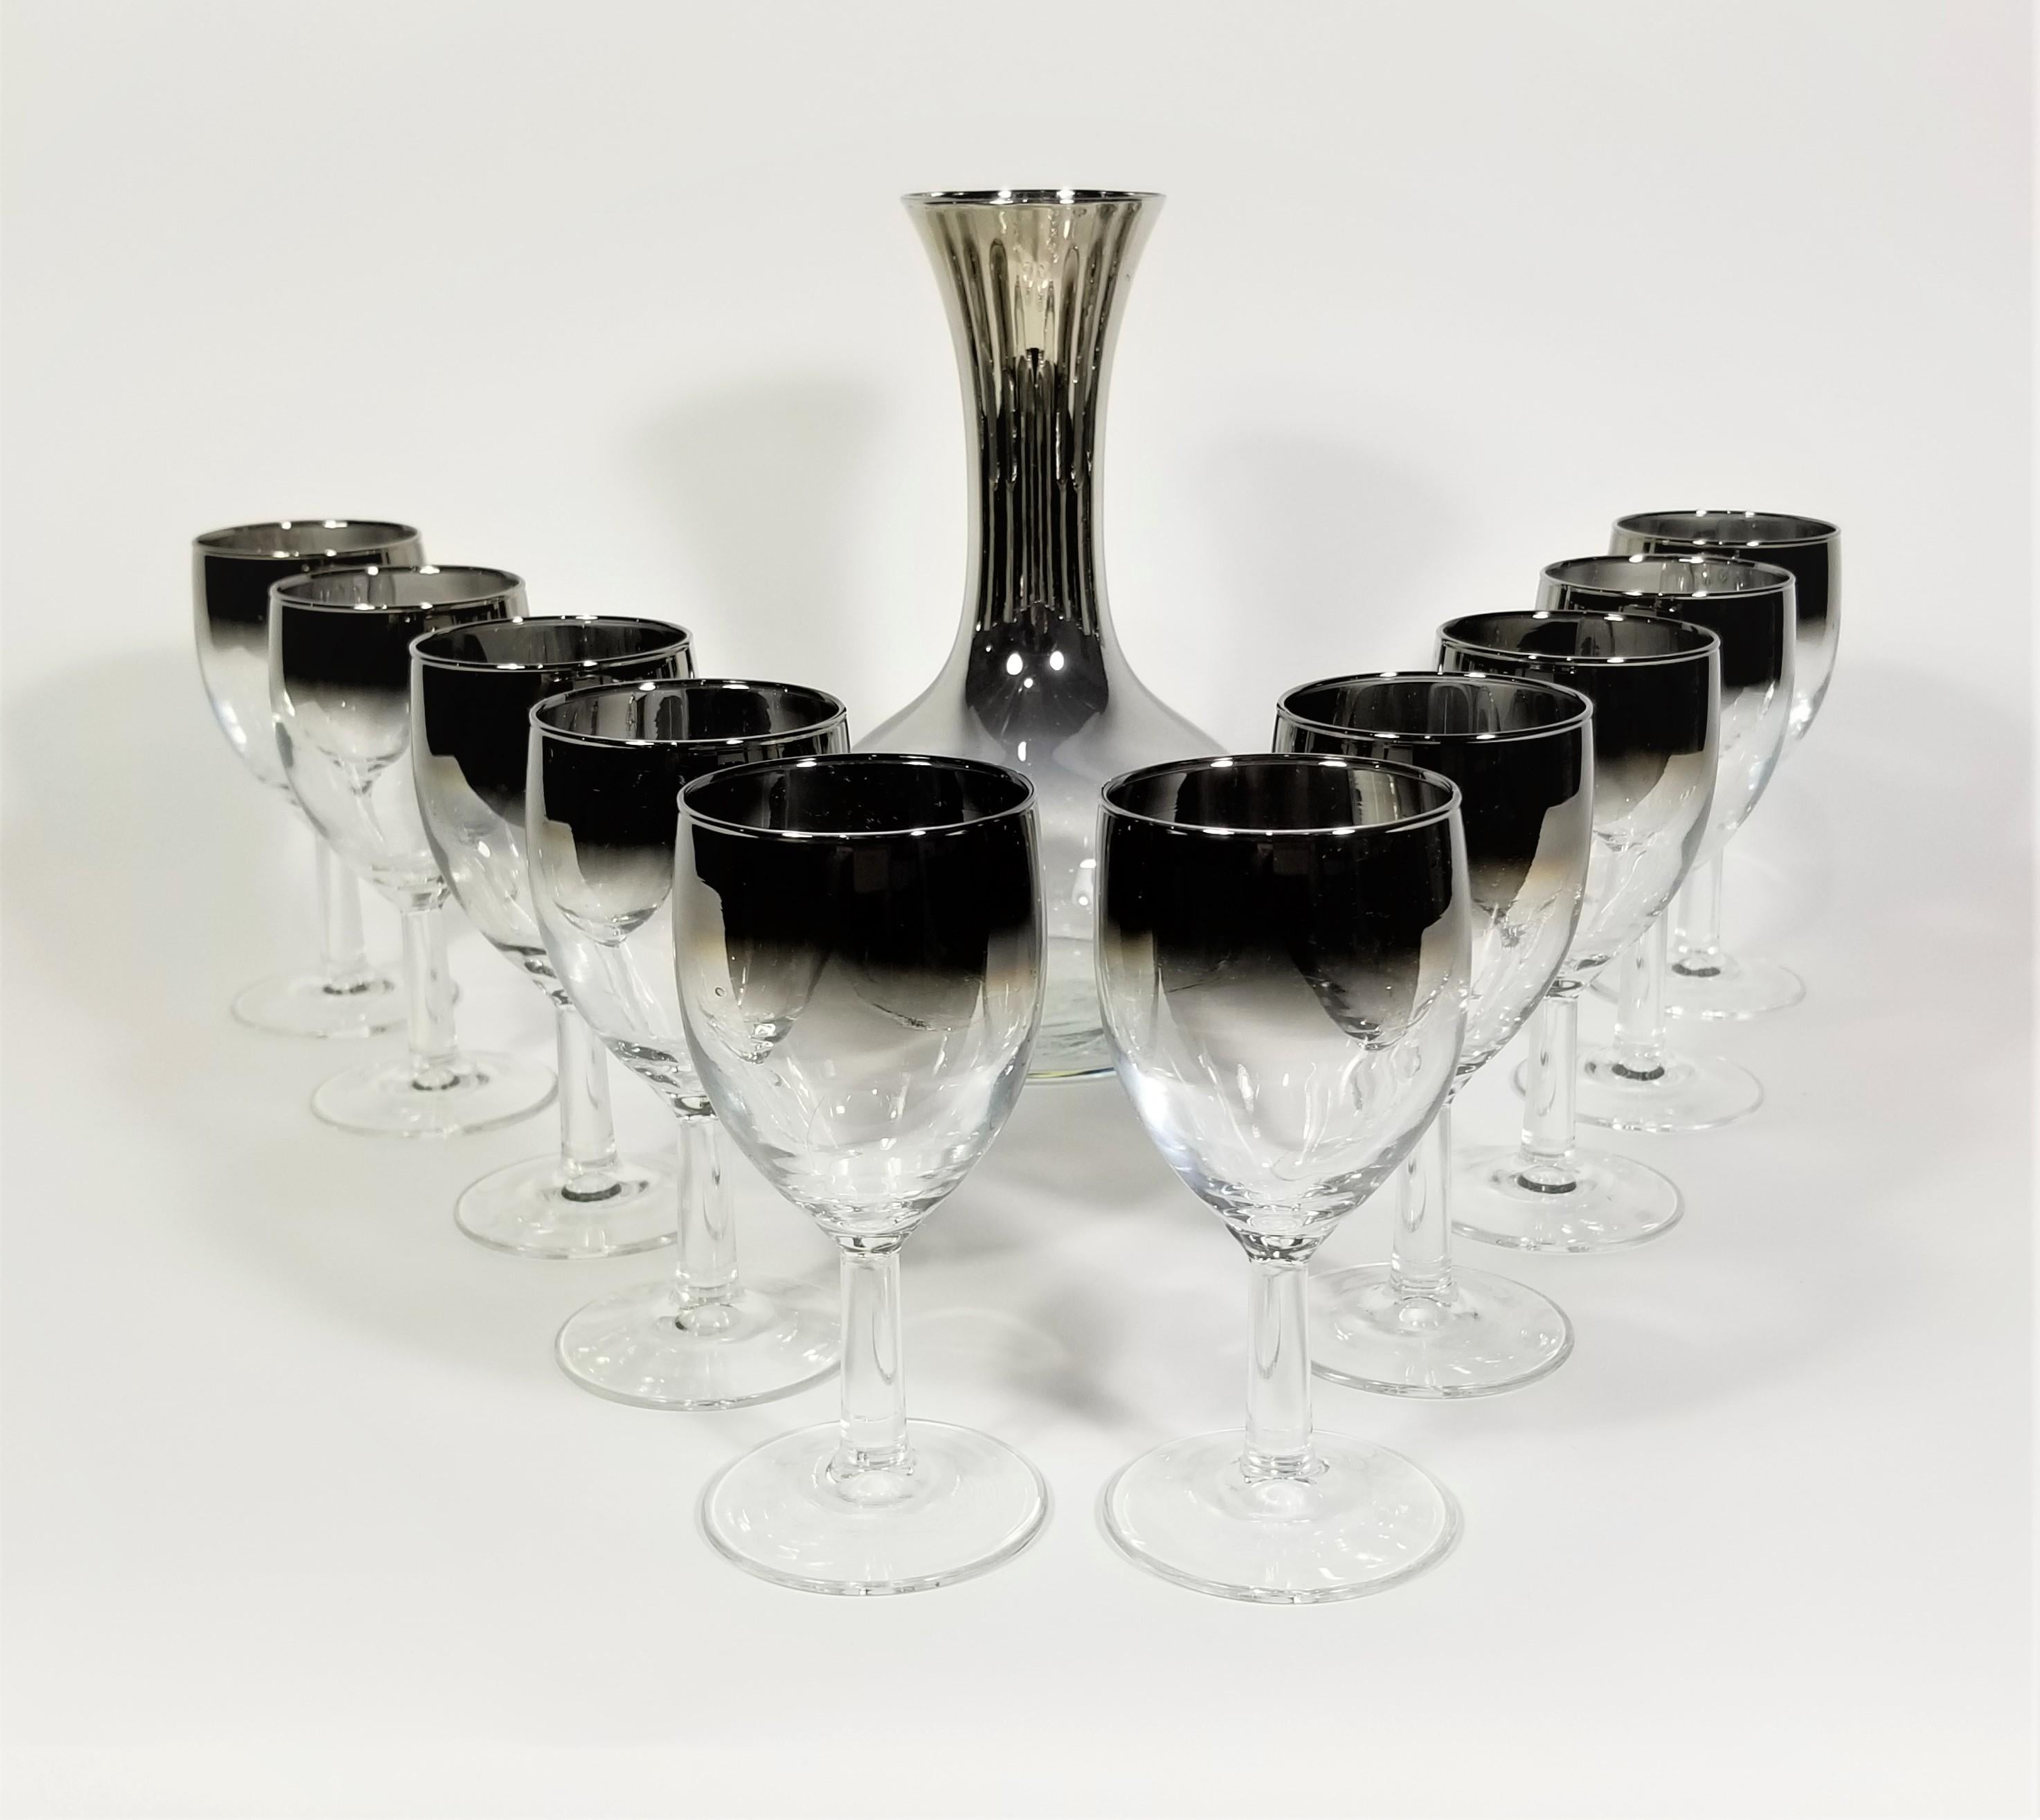 French Glassware Barware Mid-Century 1960s, Made in France  In Excellent Condition For Sale In New York, NY